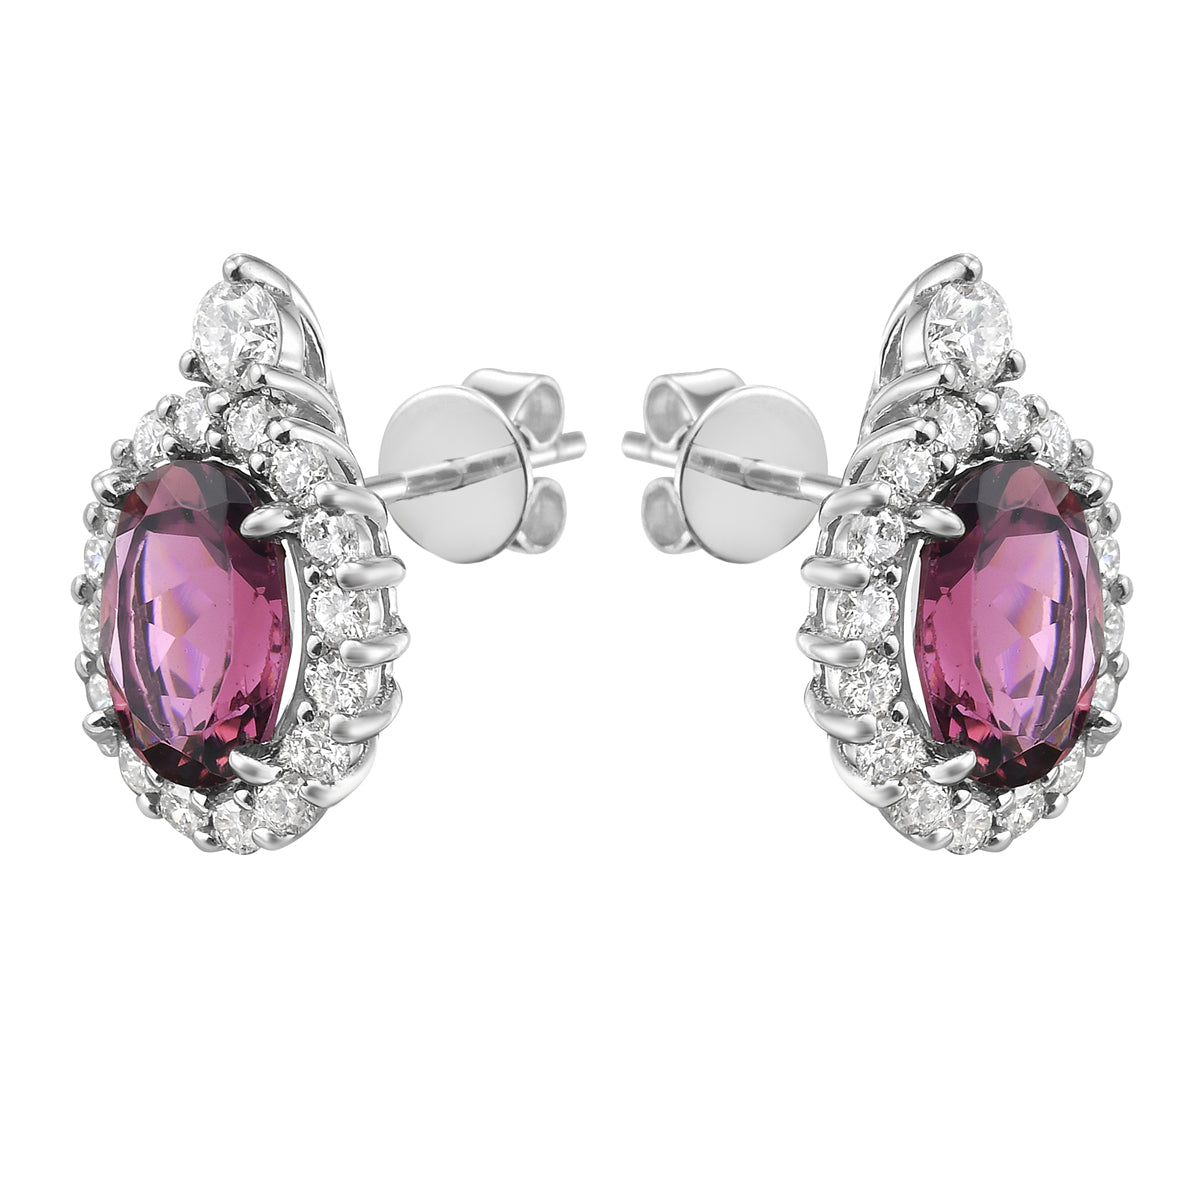 Earrings 14KW/2.6G 2PT-2.46CT 34RD-0.72CT Pink Tourmaline